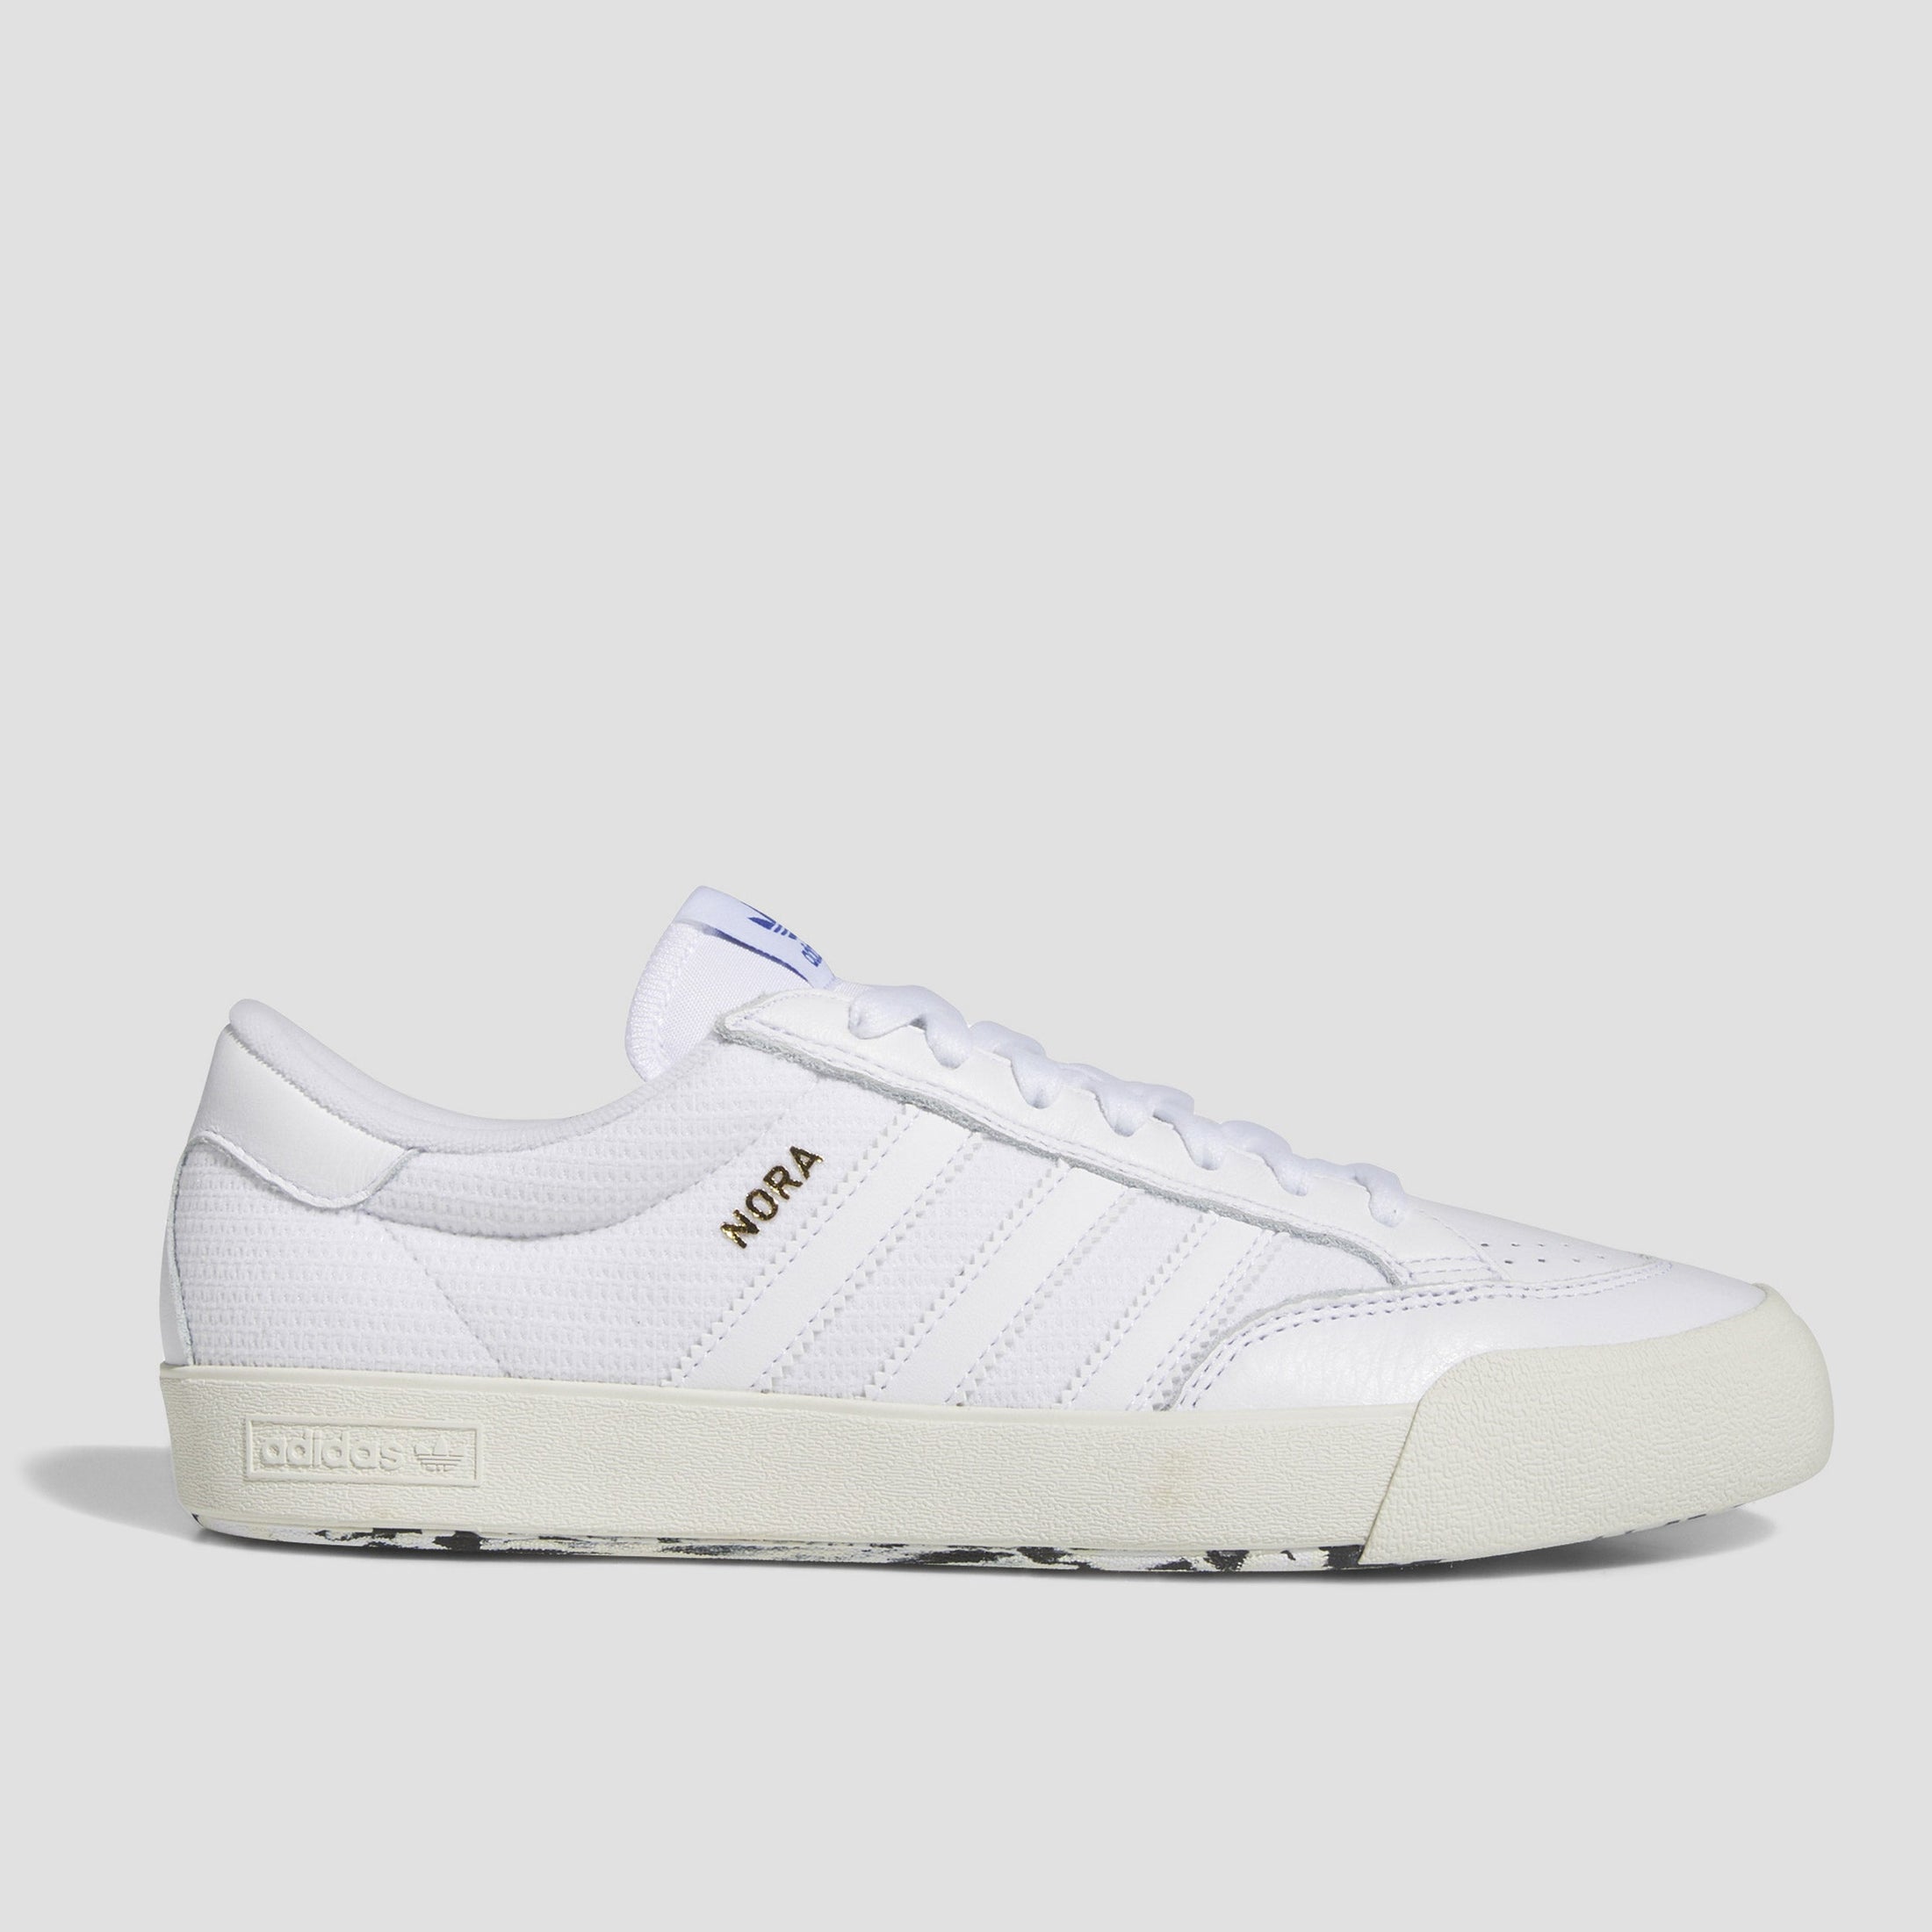 adidas Nora Shoes Cloud White / Cloud White / Ivory